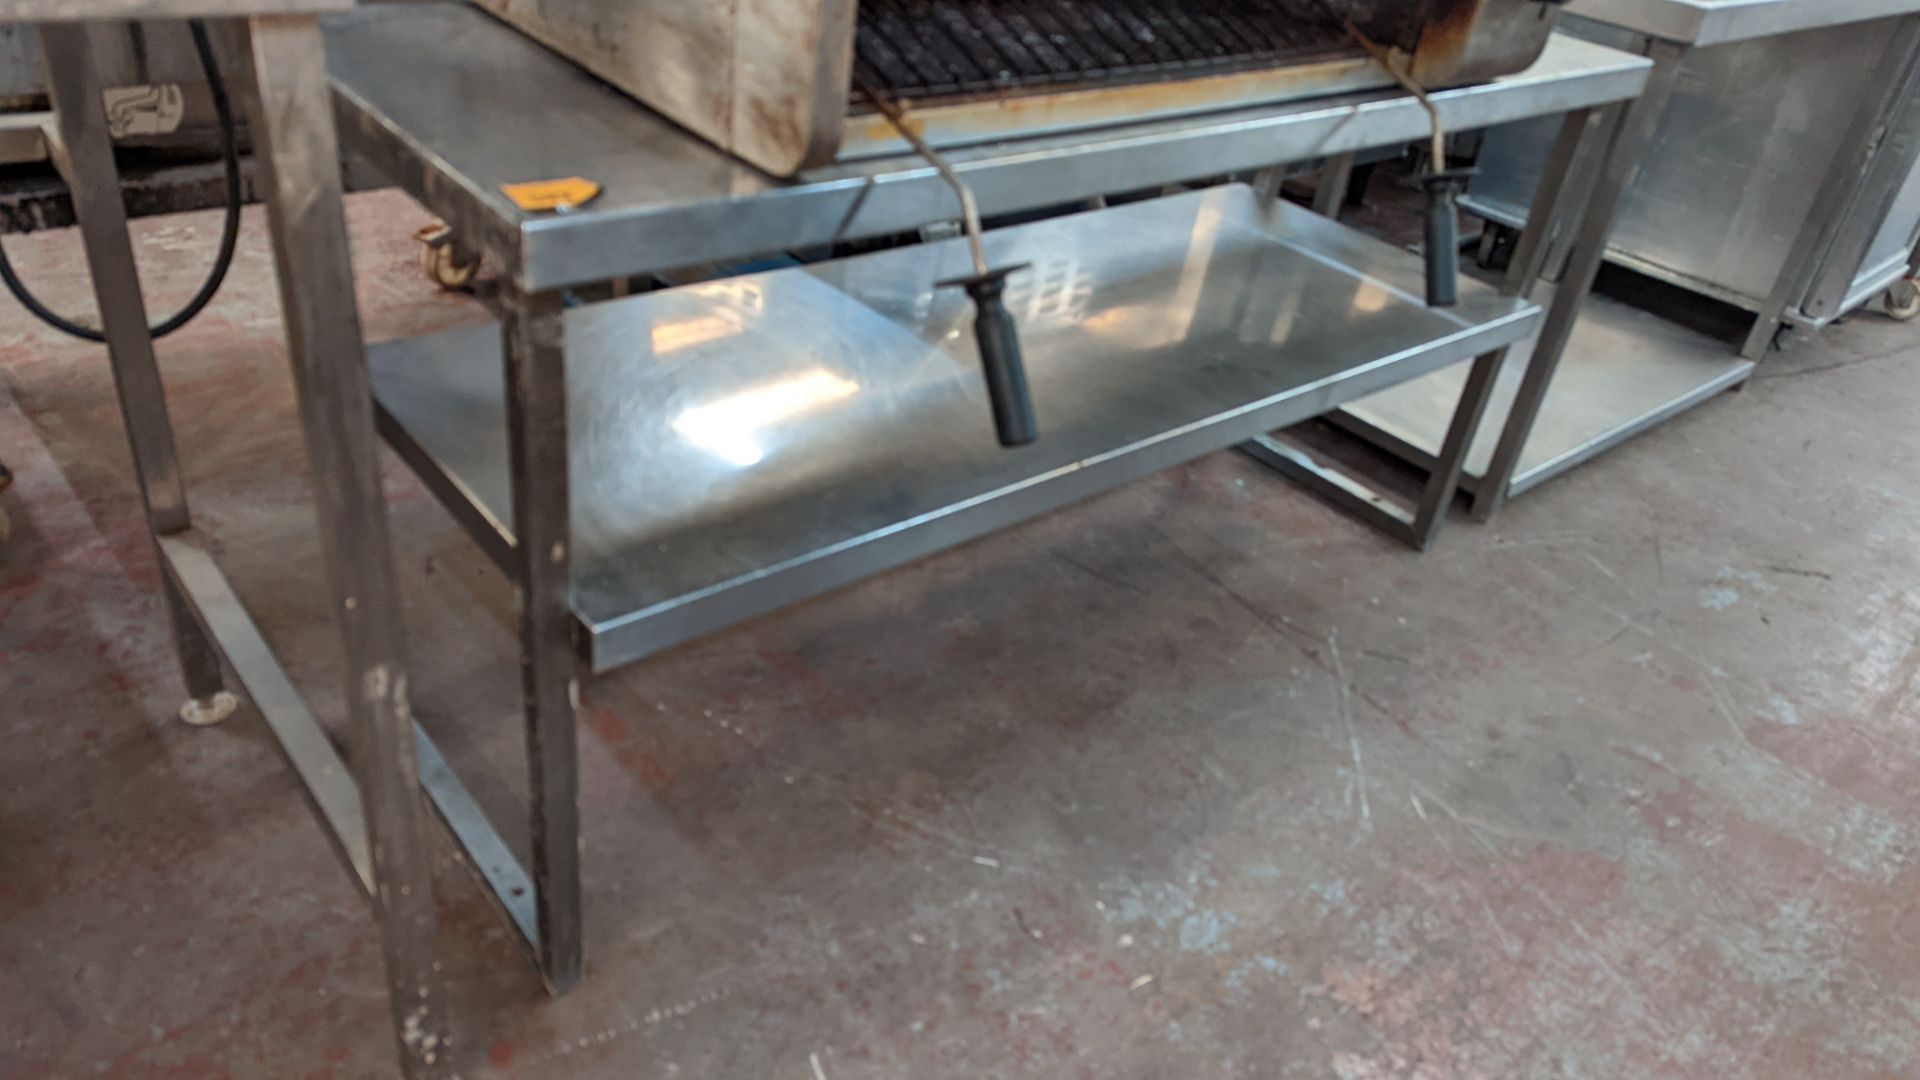 Stainless steel twin tier shelving system which appears to be designed for mounting on top of tables